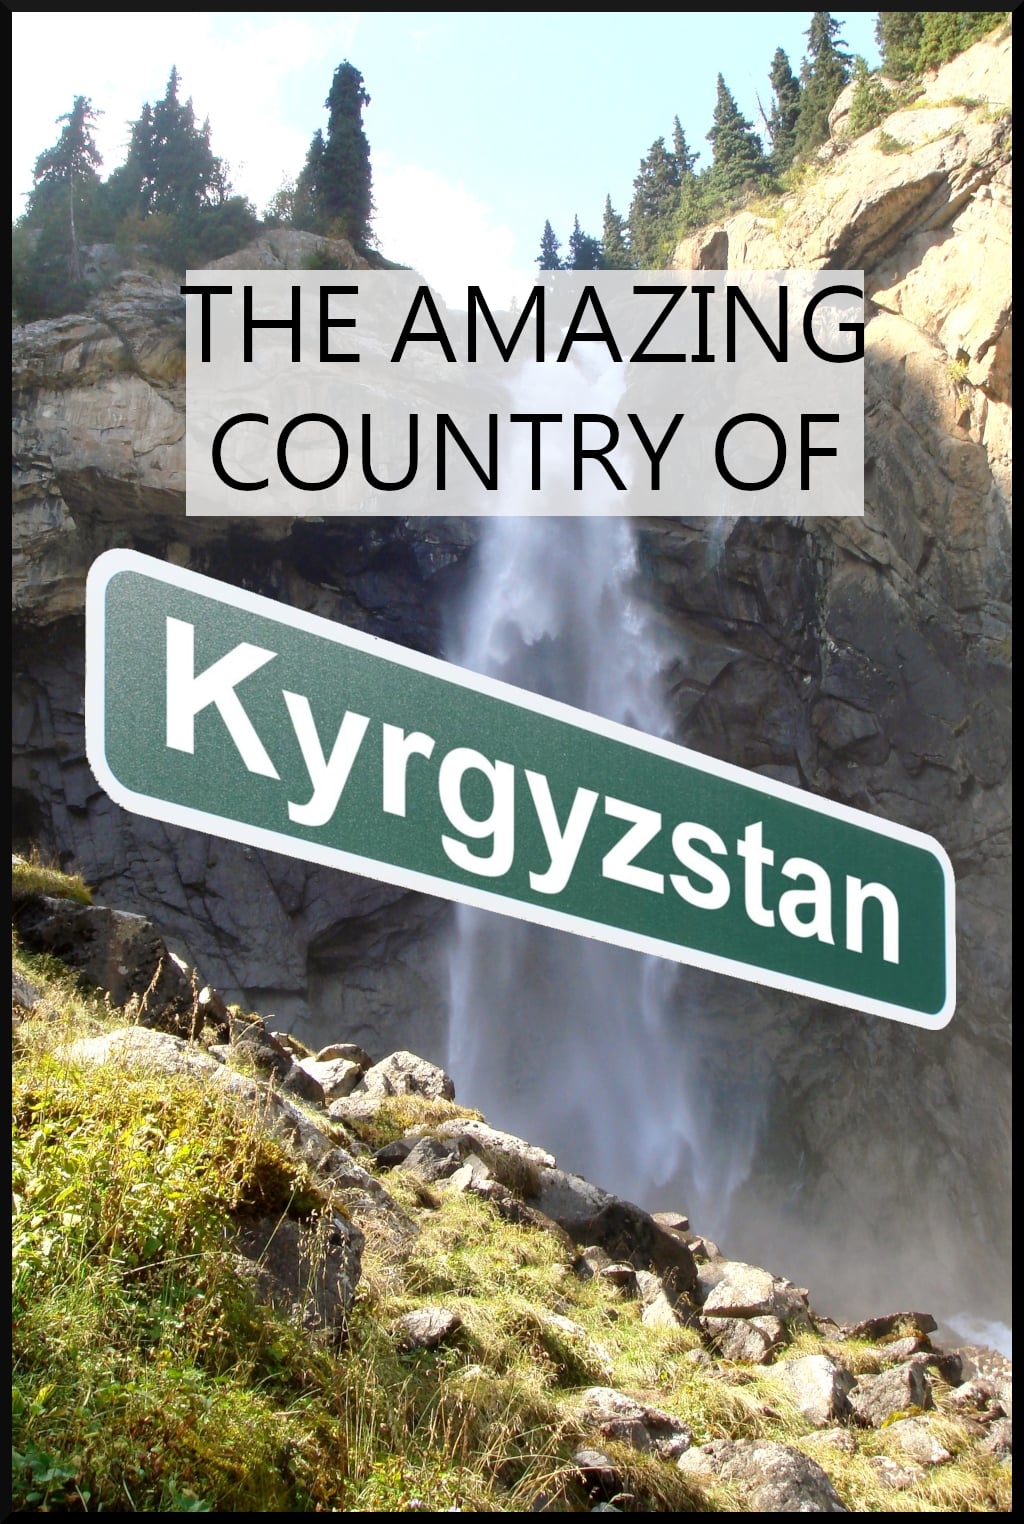 The Amazing Country of Kyrgyzstan